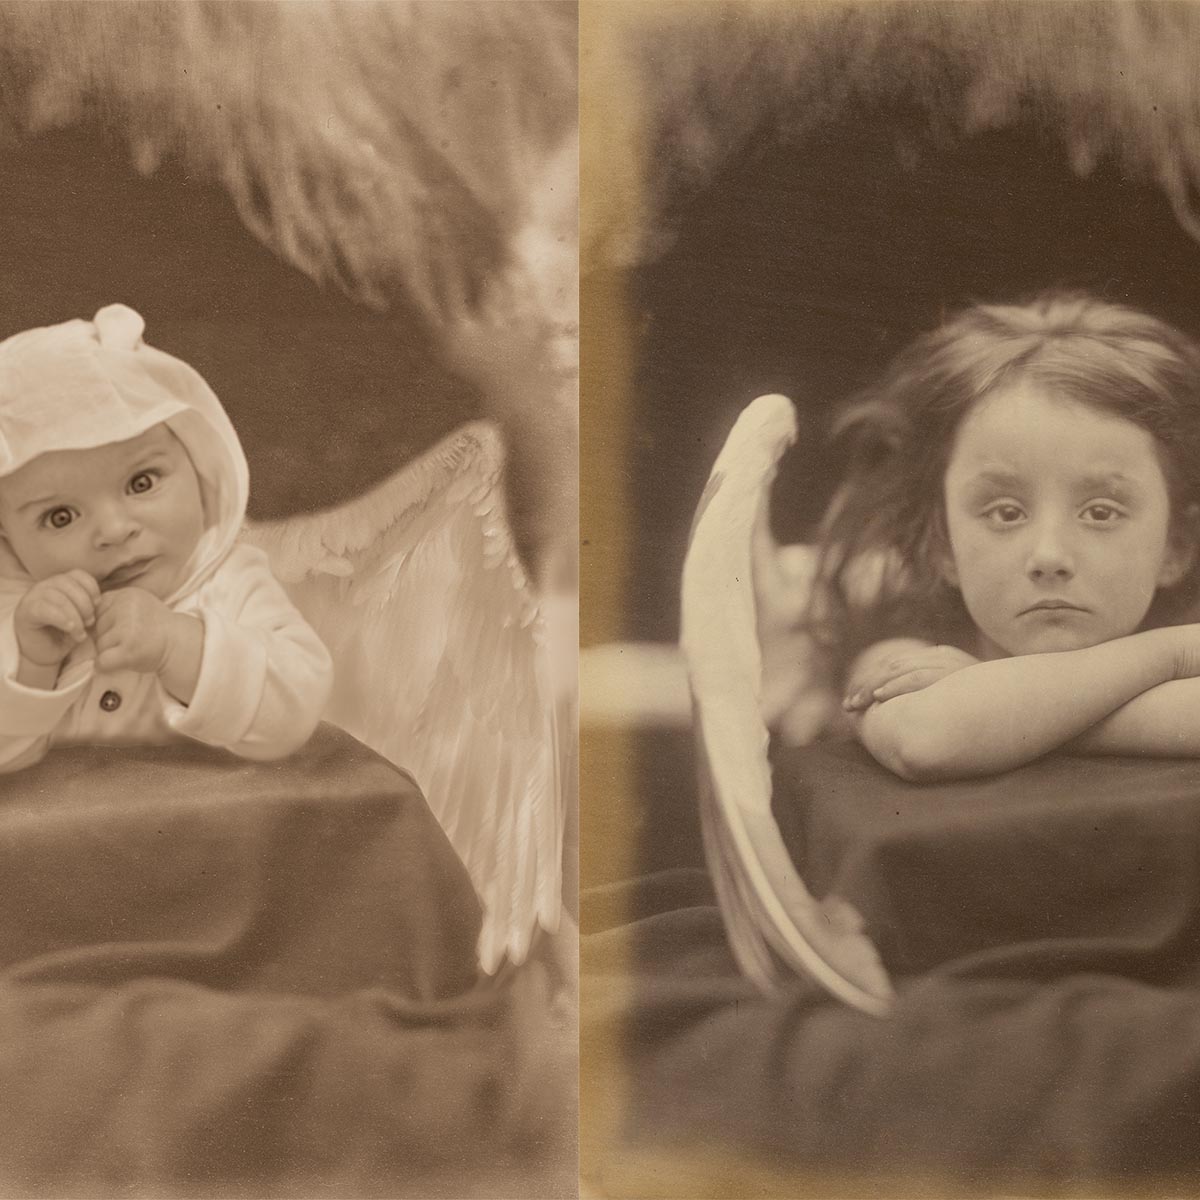 Comparison of two images: the left is a photograph of a baby with wings added on behind it. The right is a photograph of a child with wings behind her.